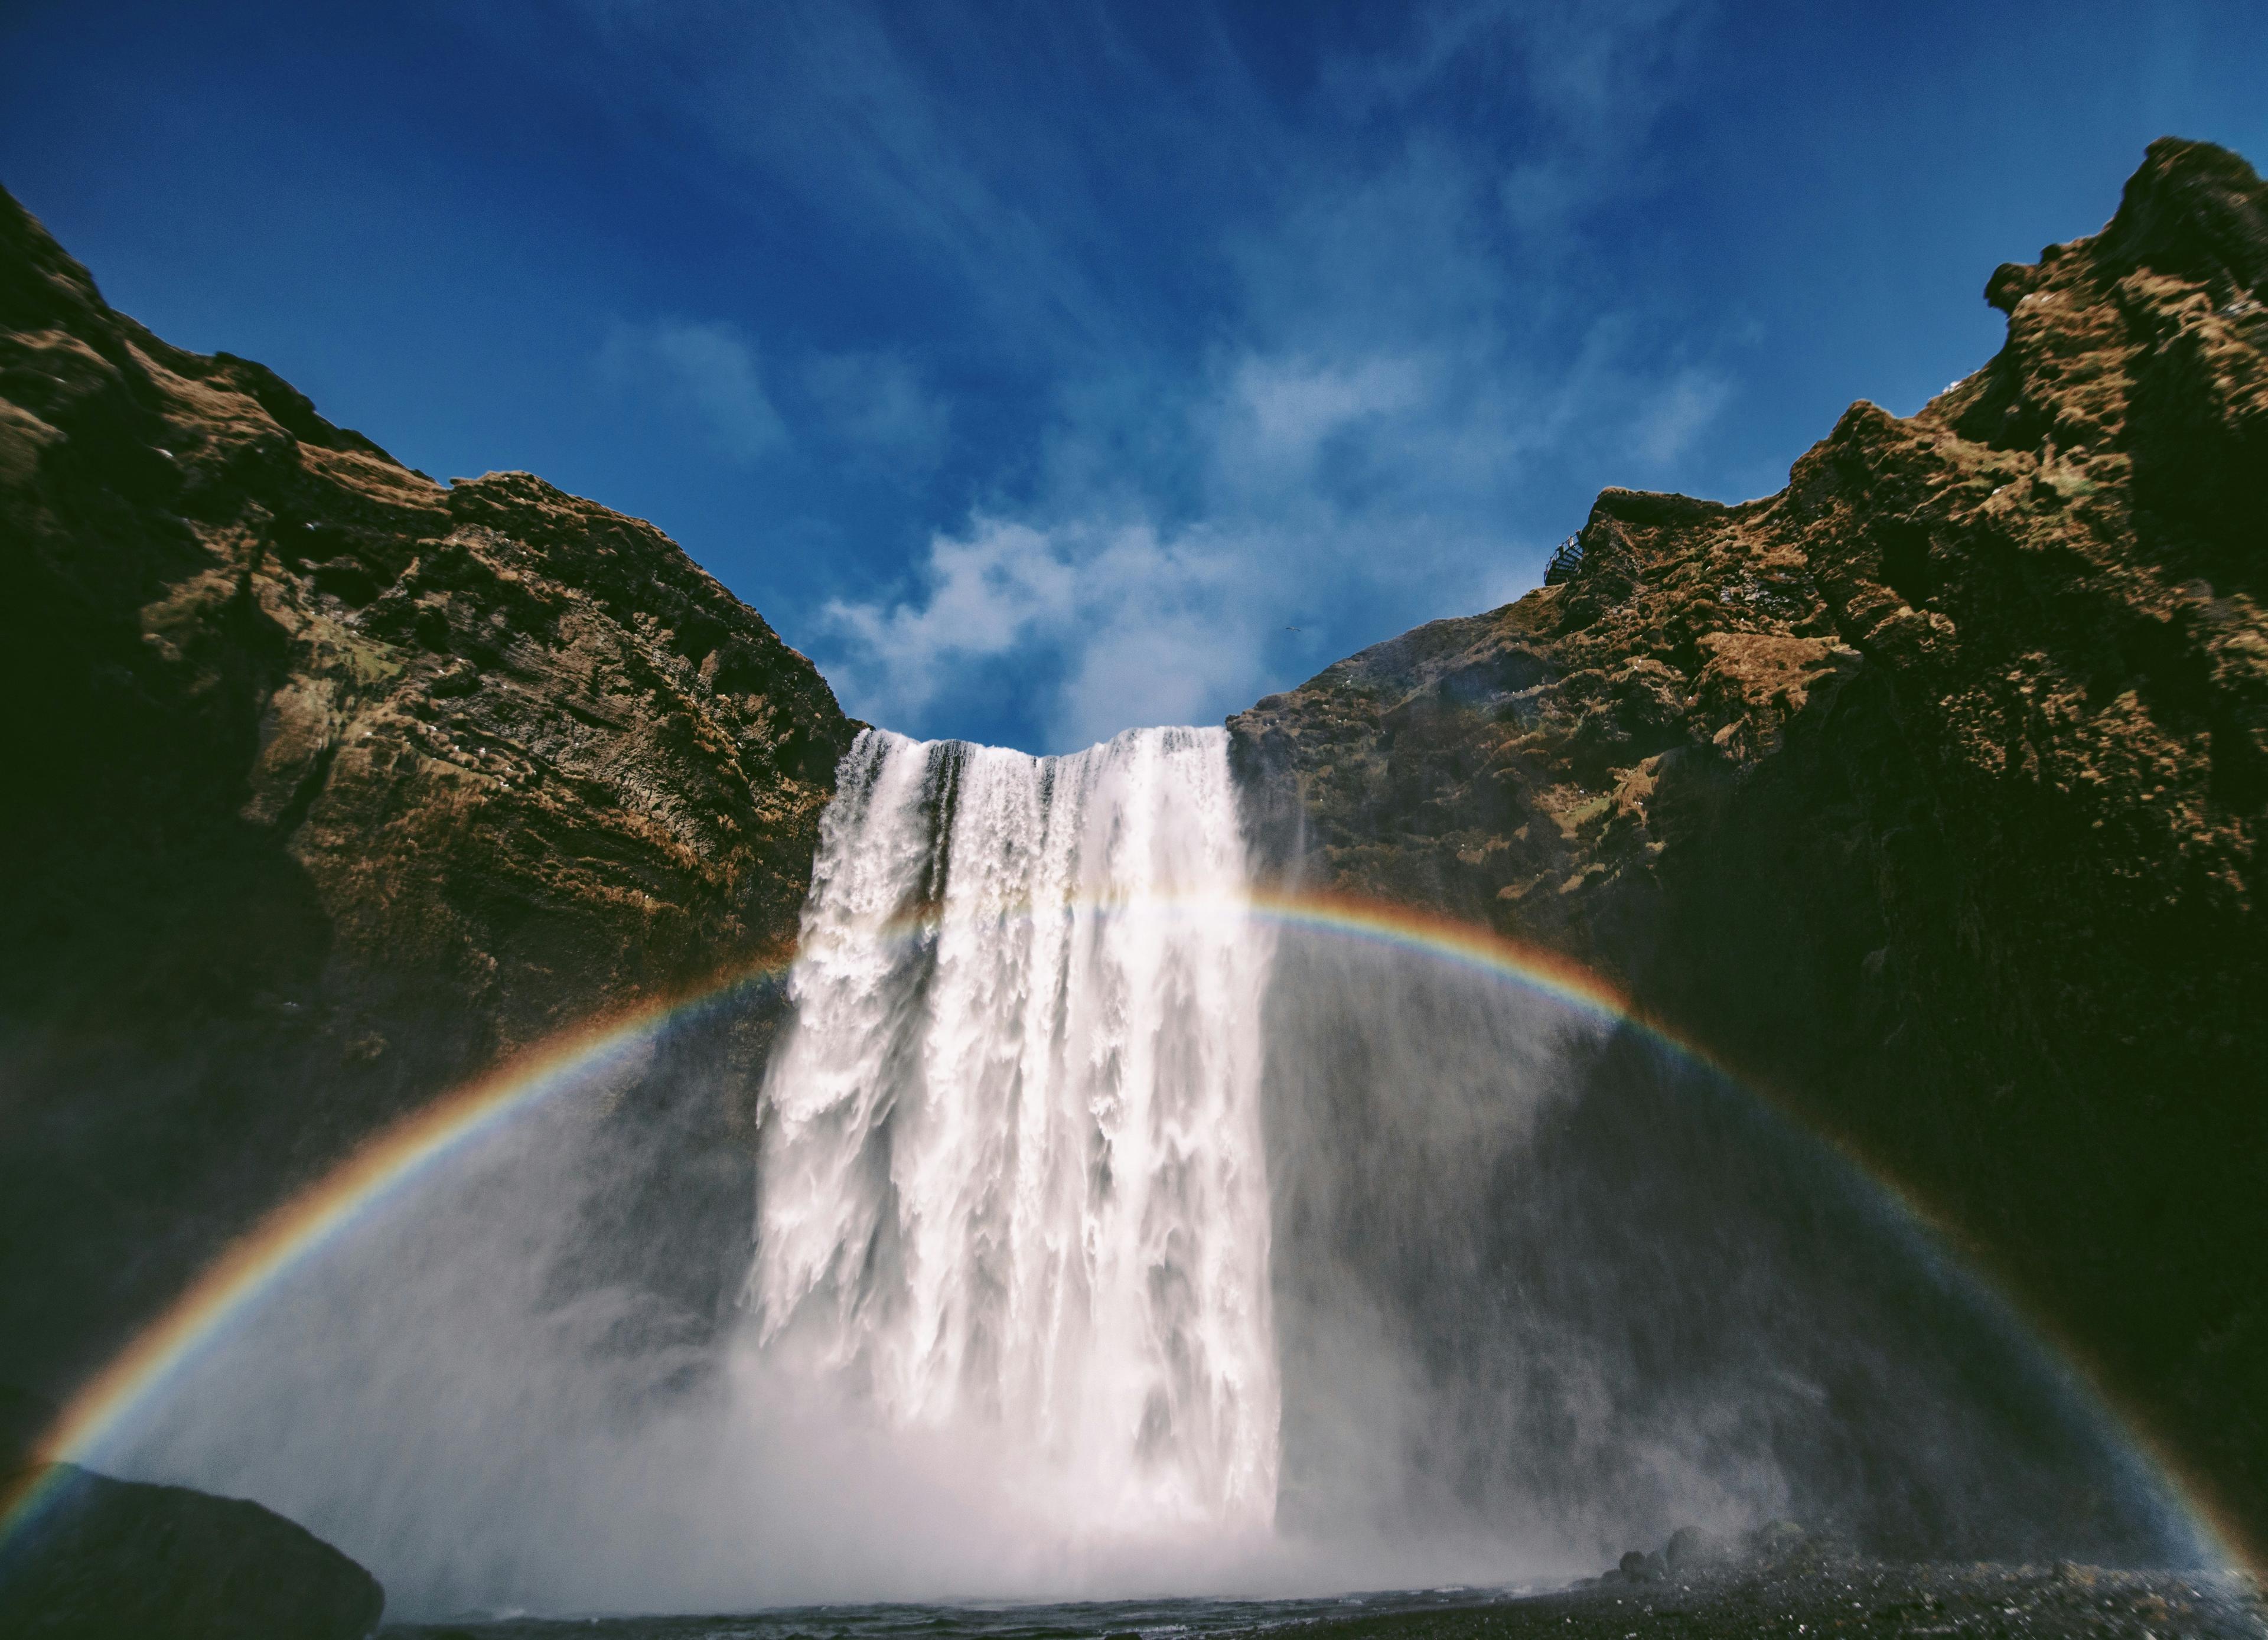 Majestic Skógafoss waterfall cascading down cliffs with a vibrant rainbow arching across the mist